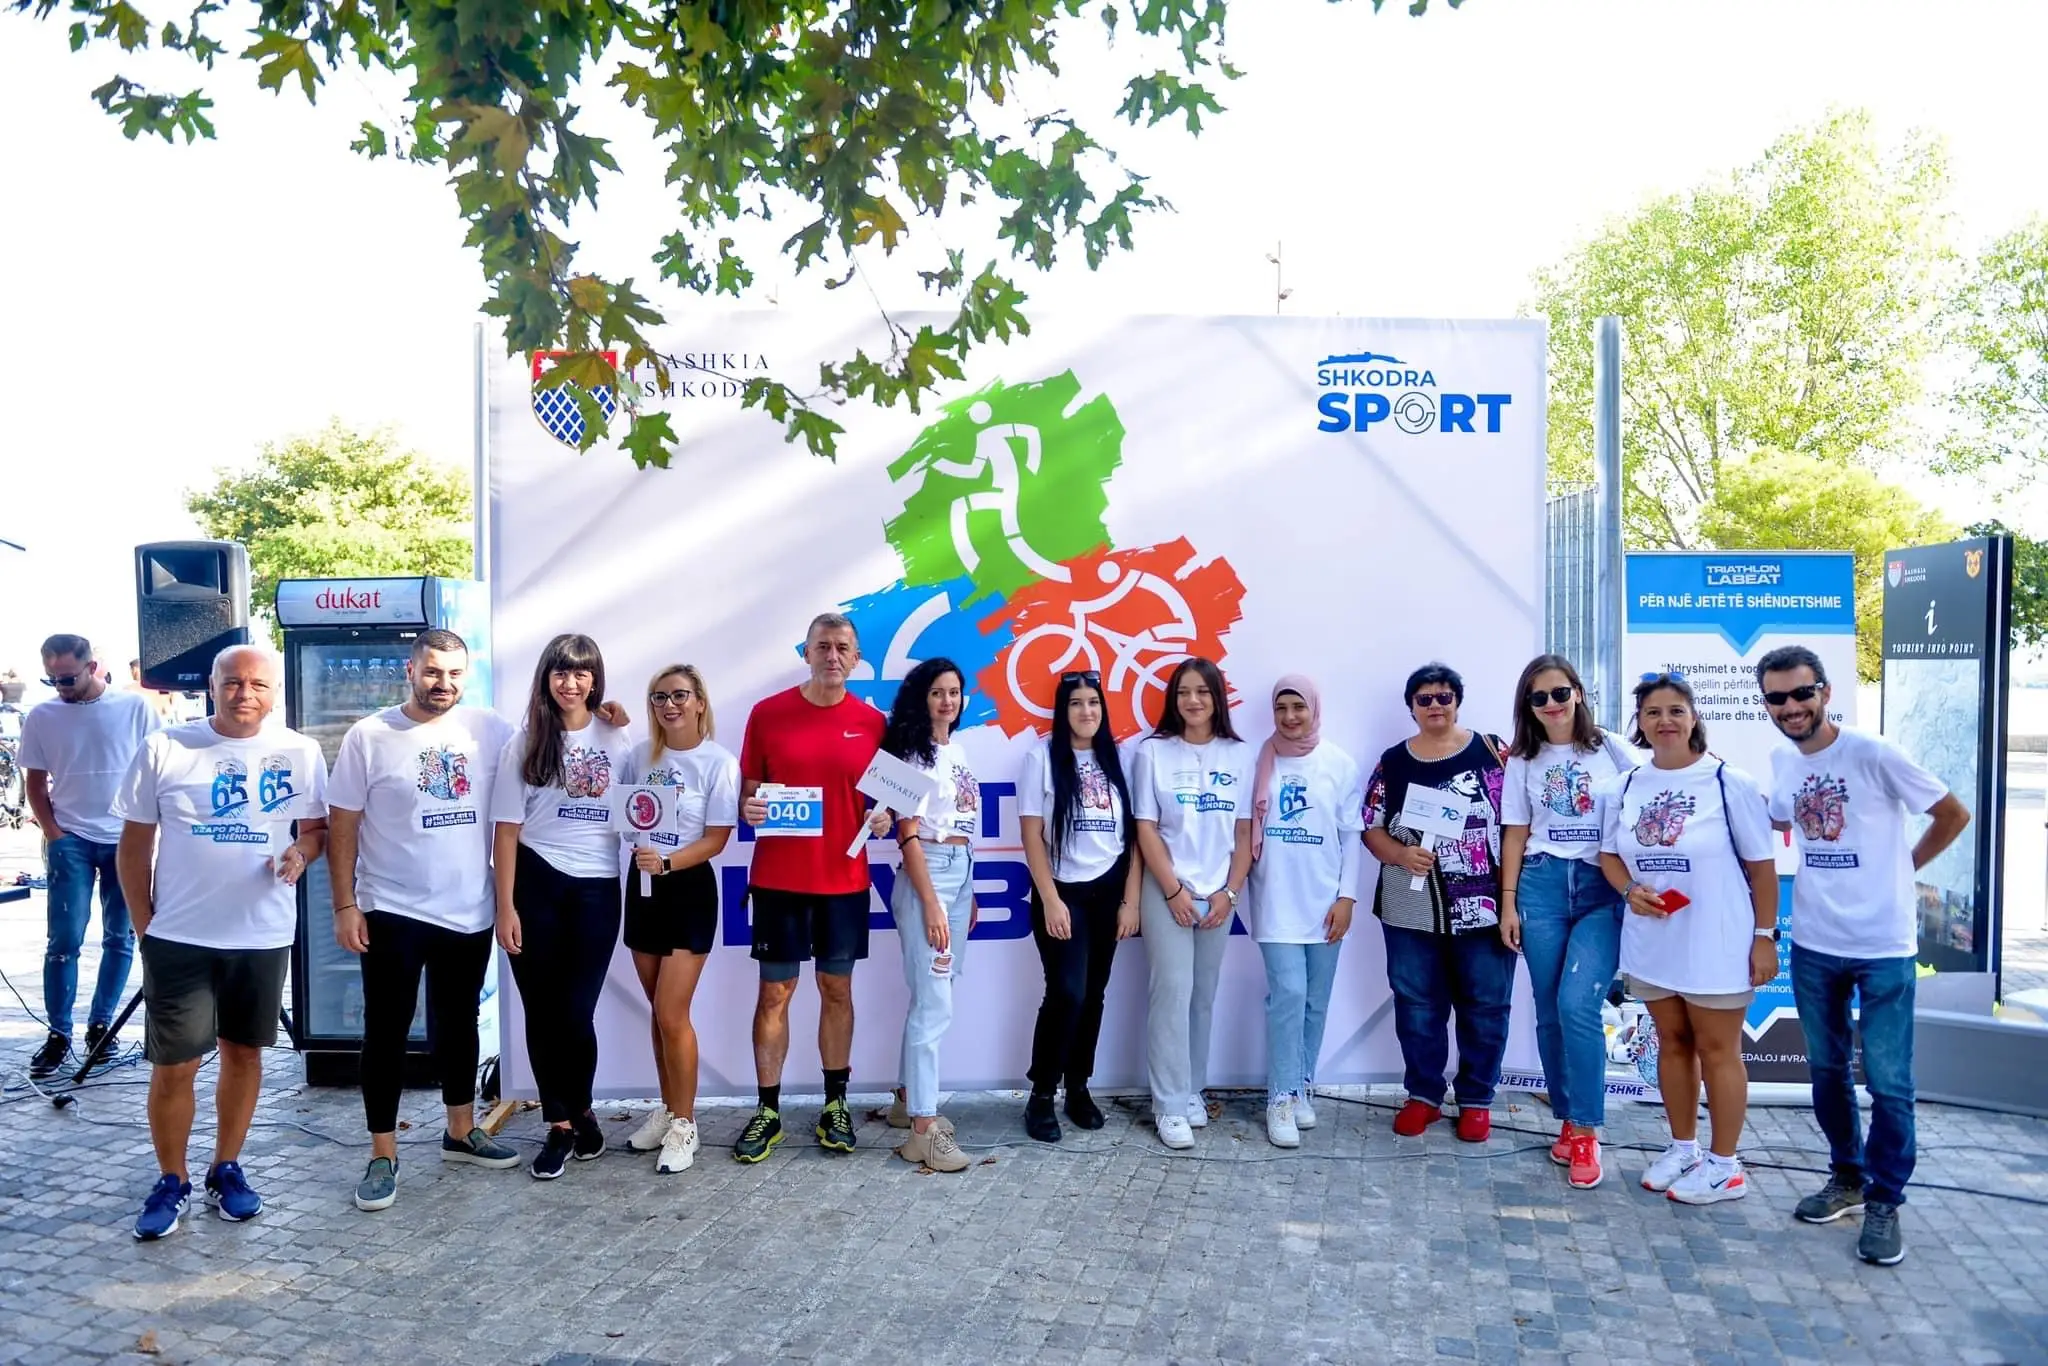 Triathlon Labeat “For a healthy Life” – Heart Disease Awareness campaign